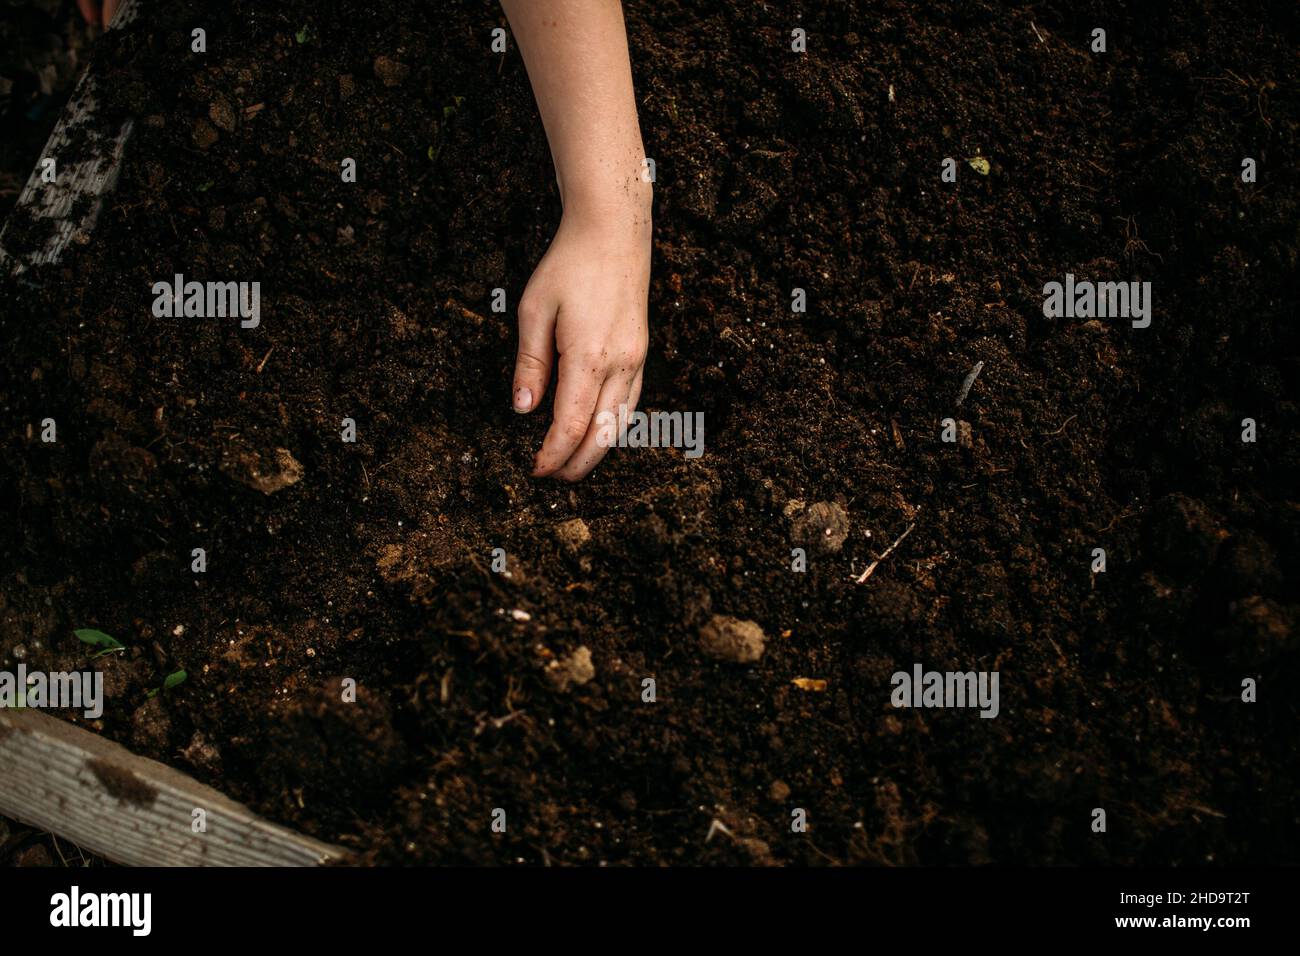 Young girl's hand digging in dirt outside Stock Photo